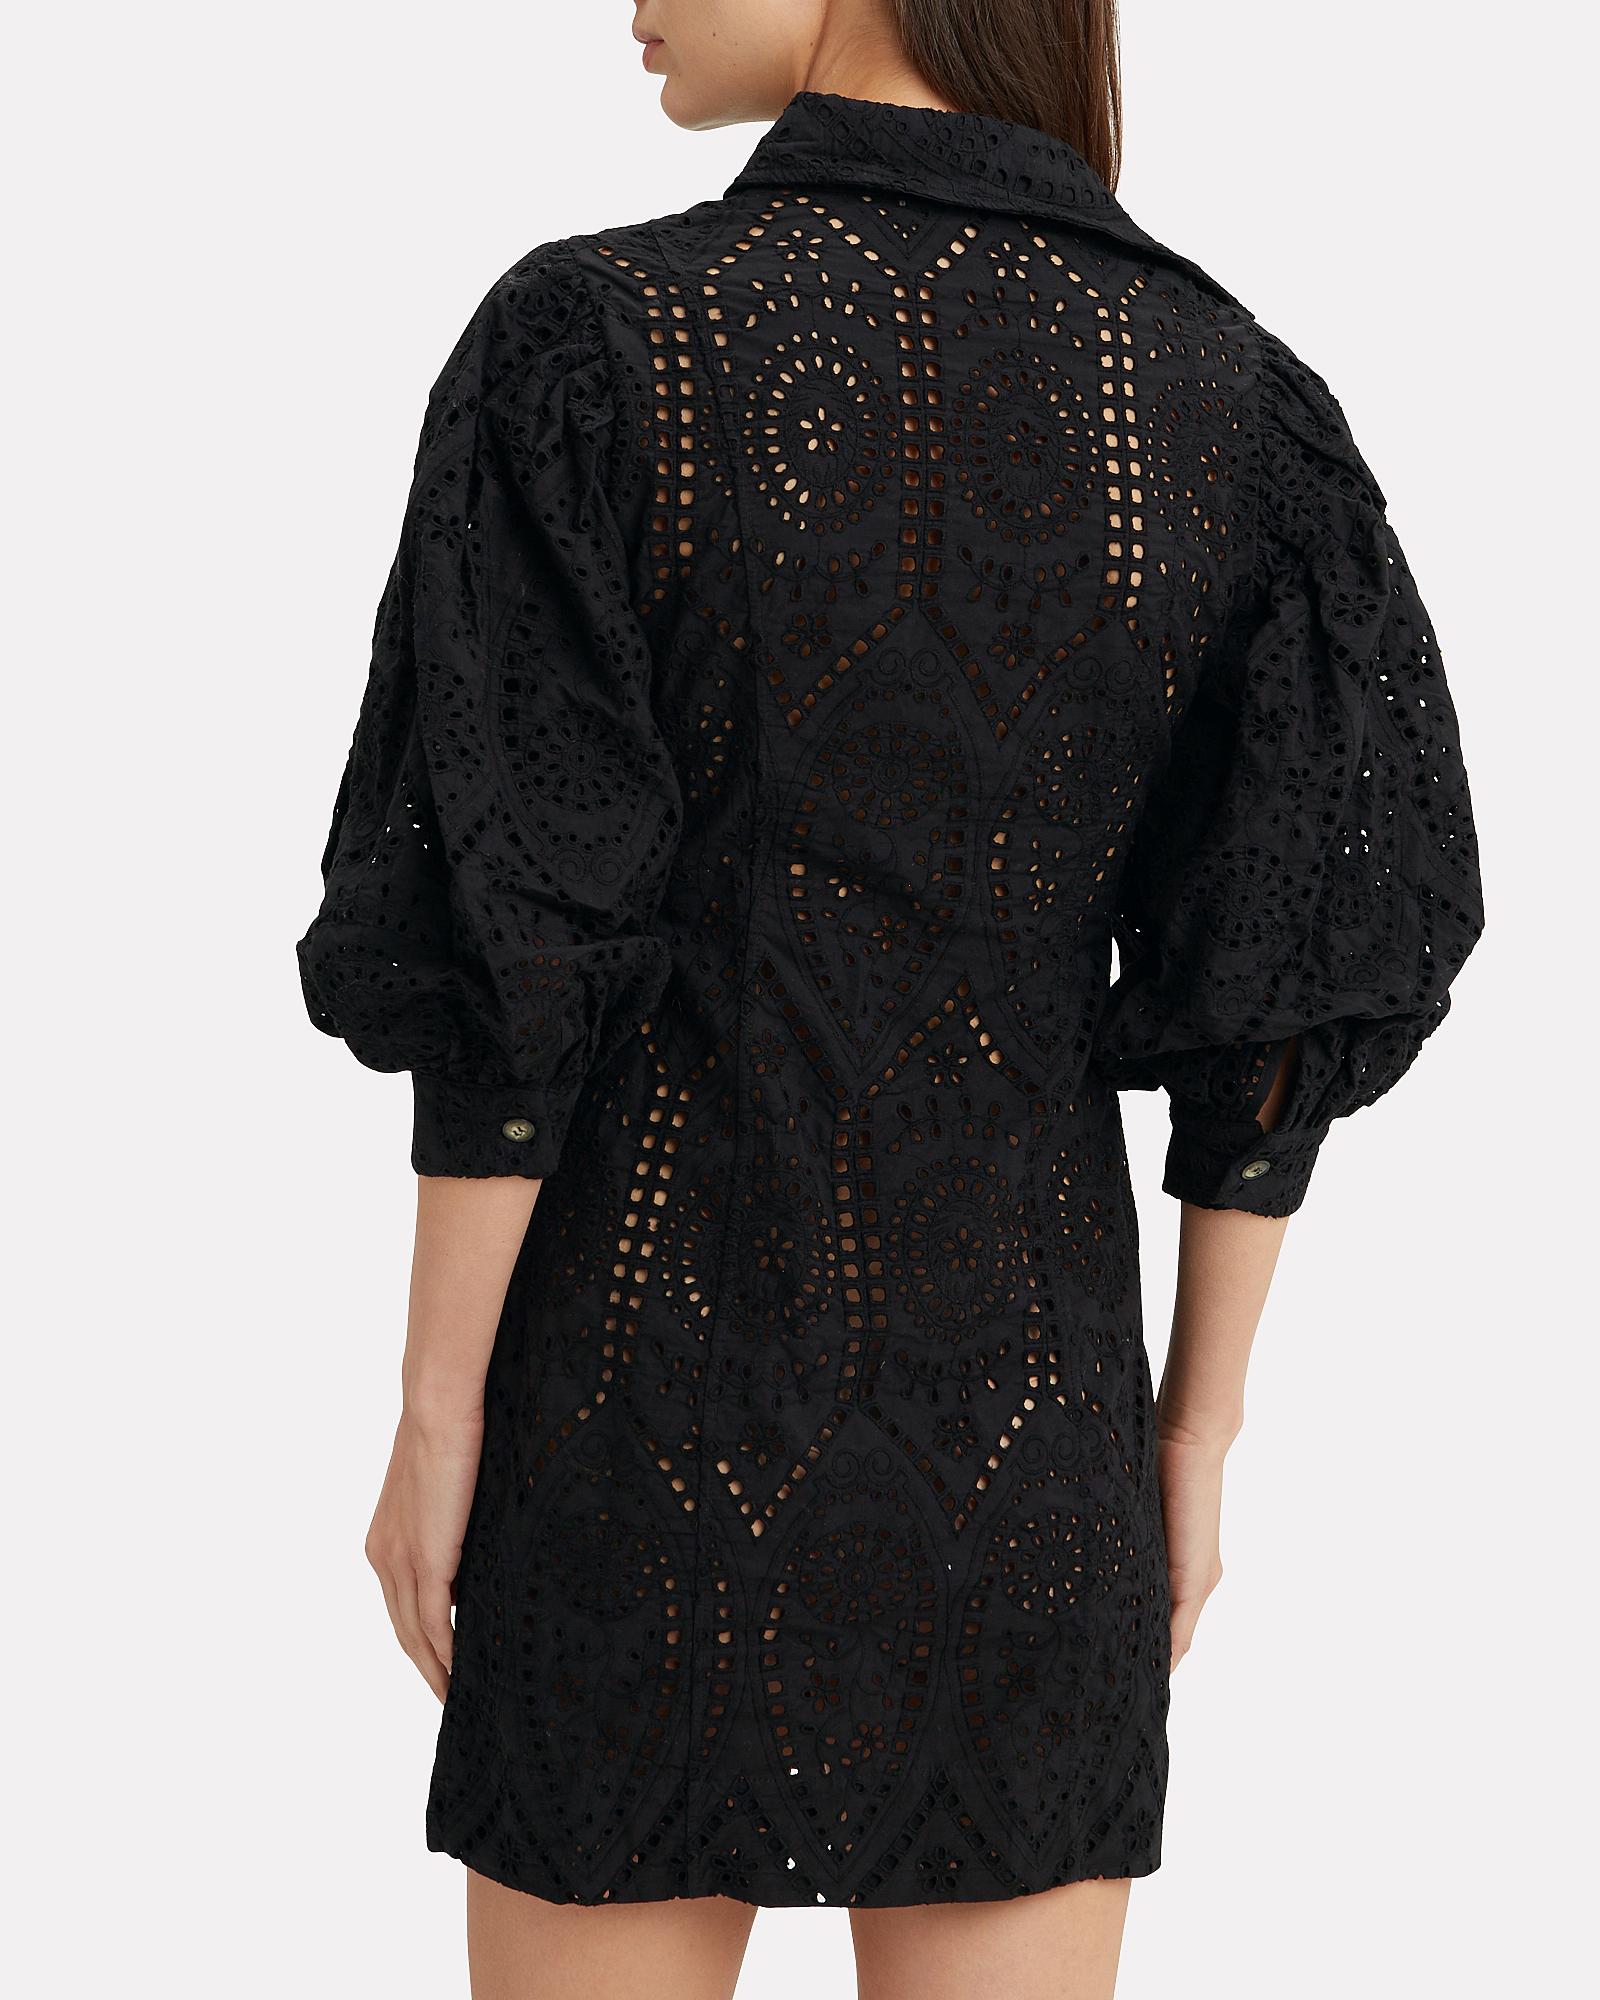 Ganni Broderie Anglaise Dress in Black | Lyst